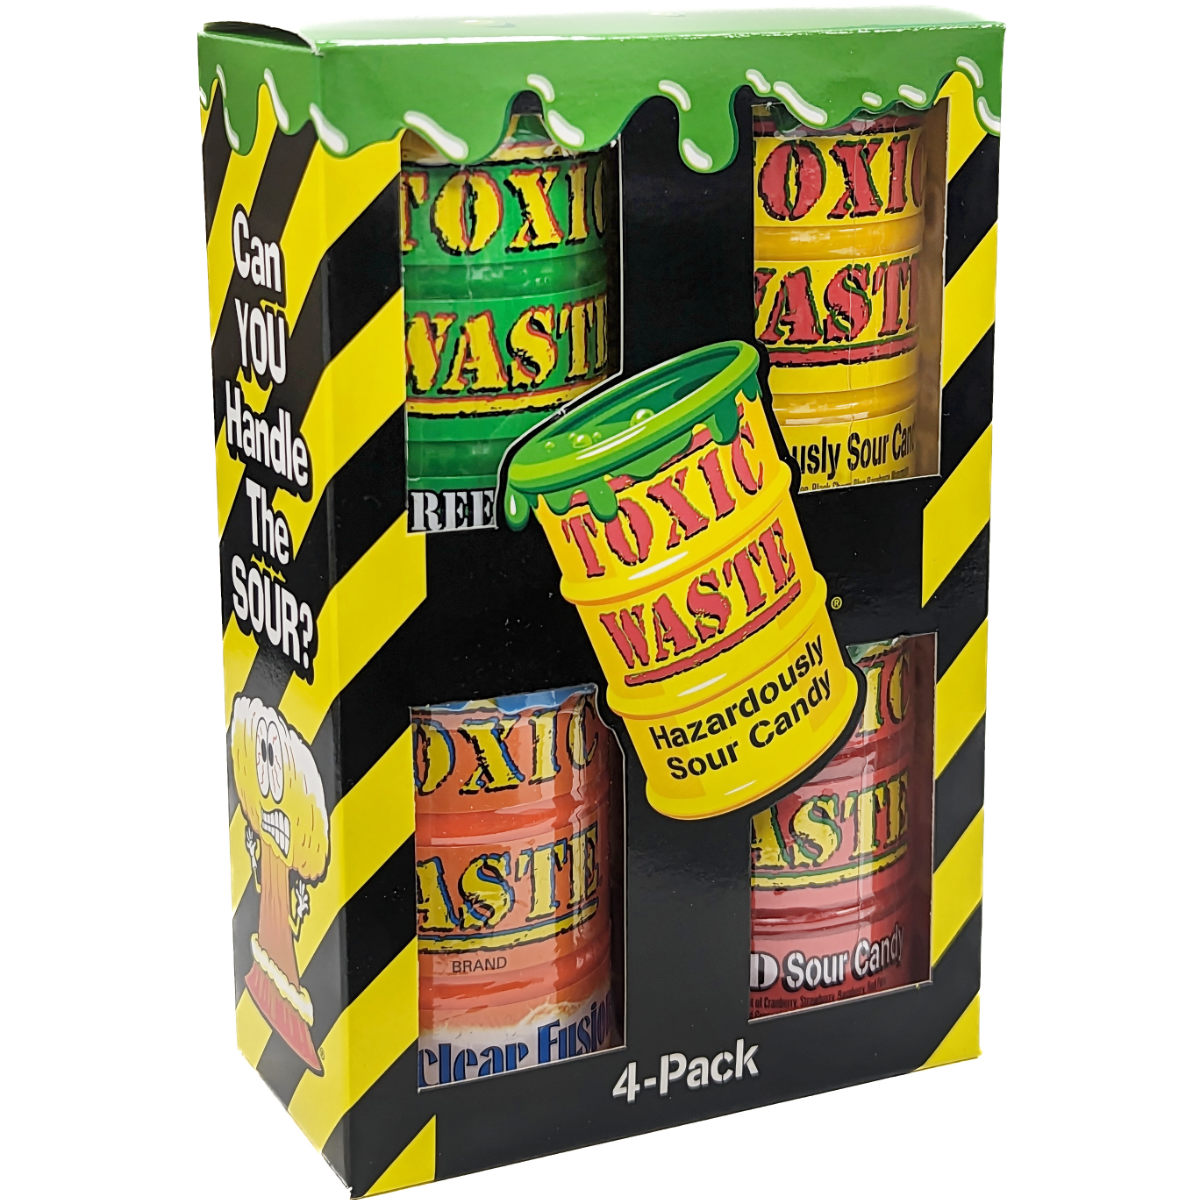 Toxic Waste Four Pack (Sour Candy Cans)